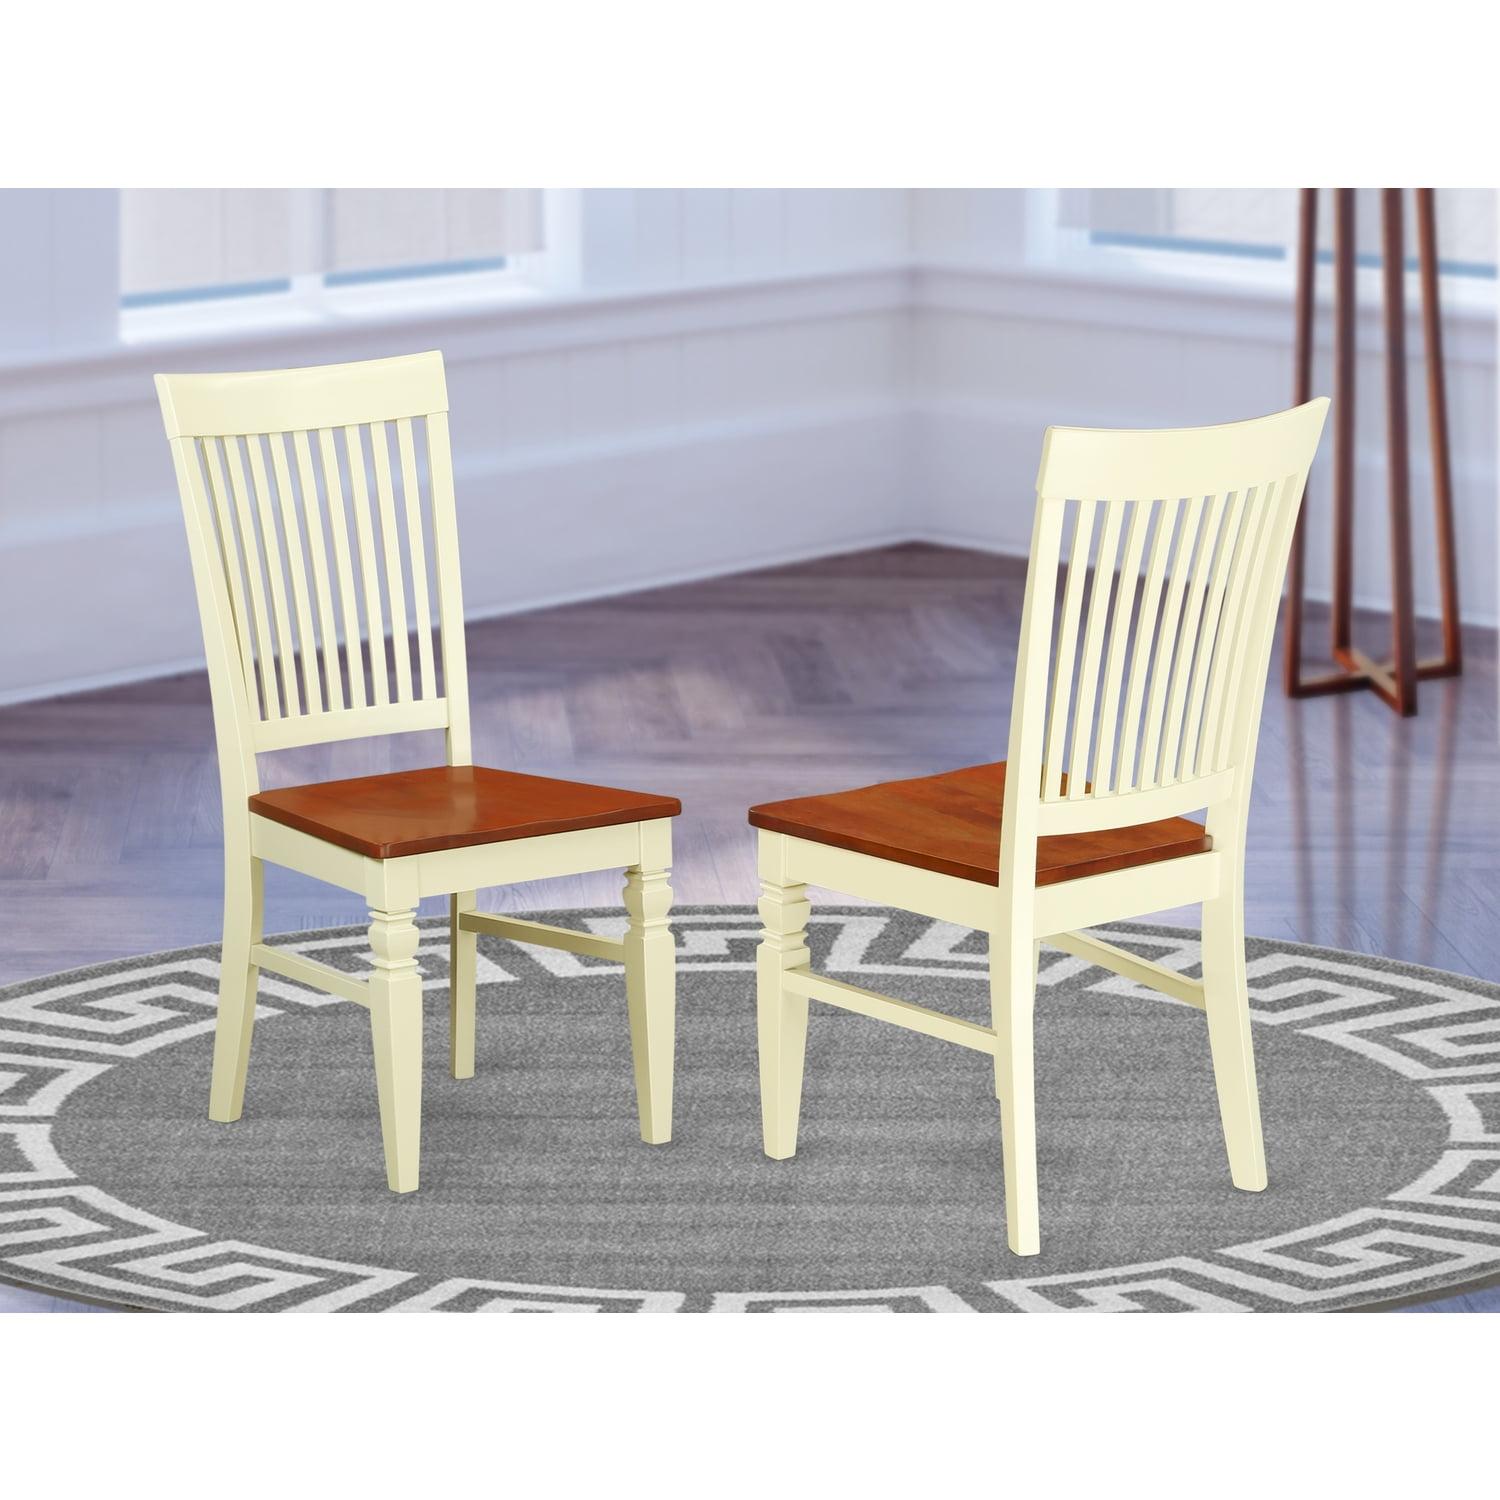 Buttermilk & Cherry High Slat Back Wood Dining Chairs (Set of 2)